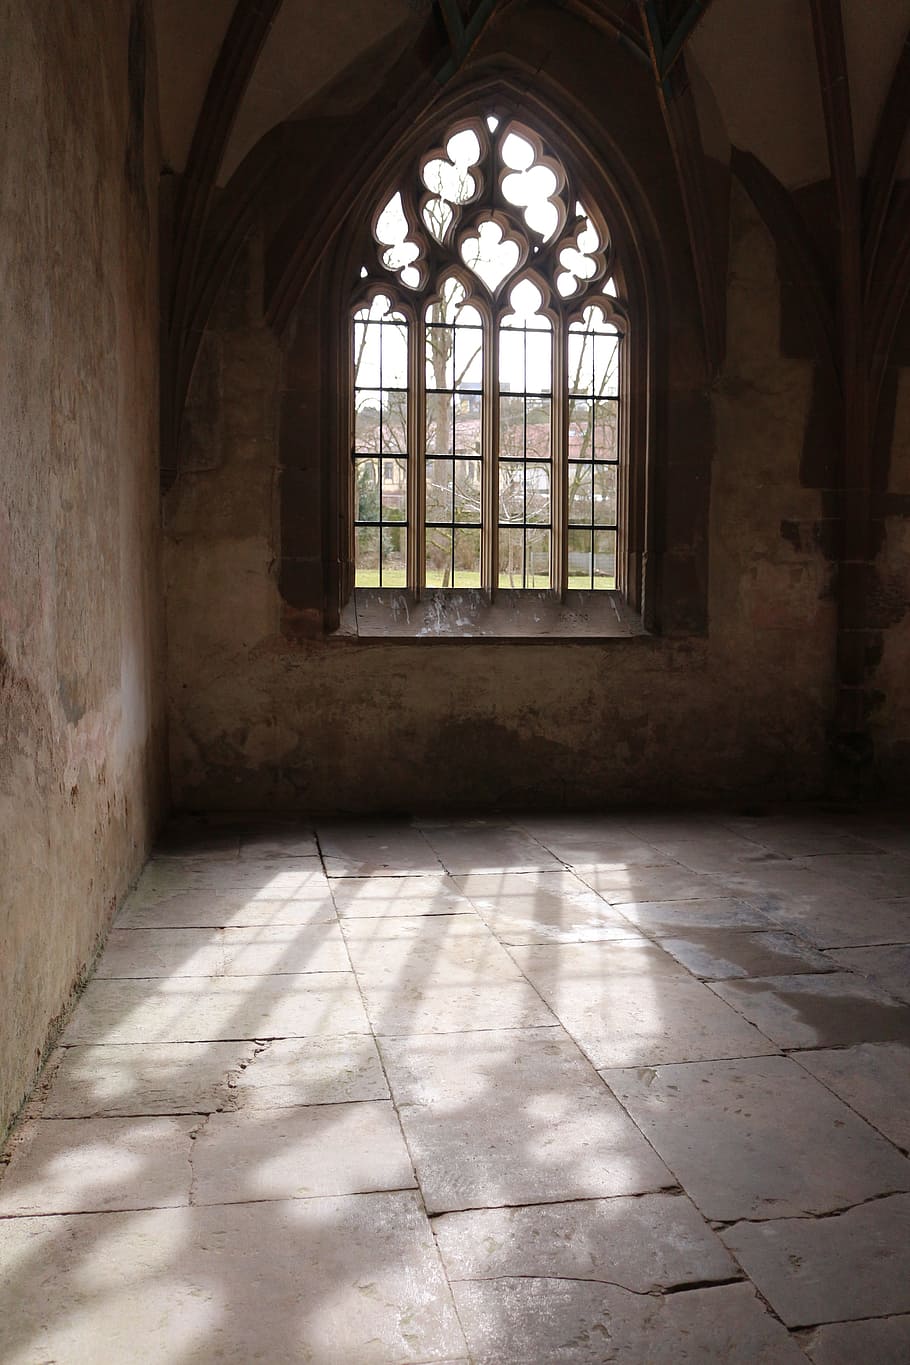 incidence of light, window, historically, former monastery, leicester abbey, sunlight, architecture, arch, flooring, indoors